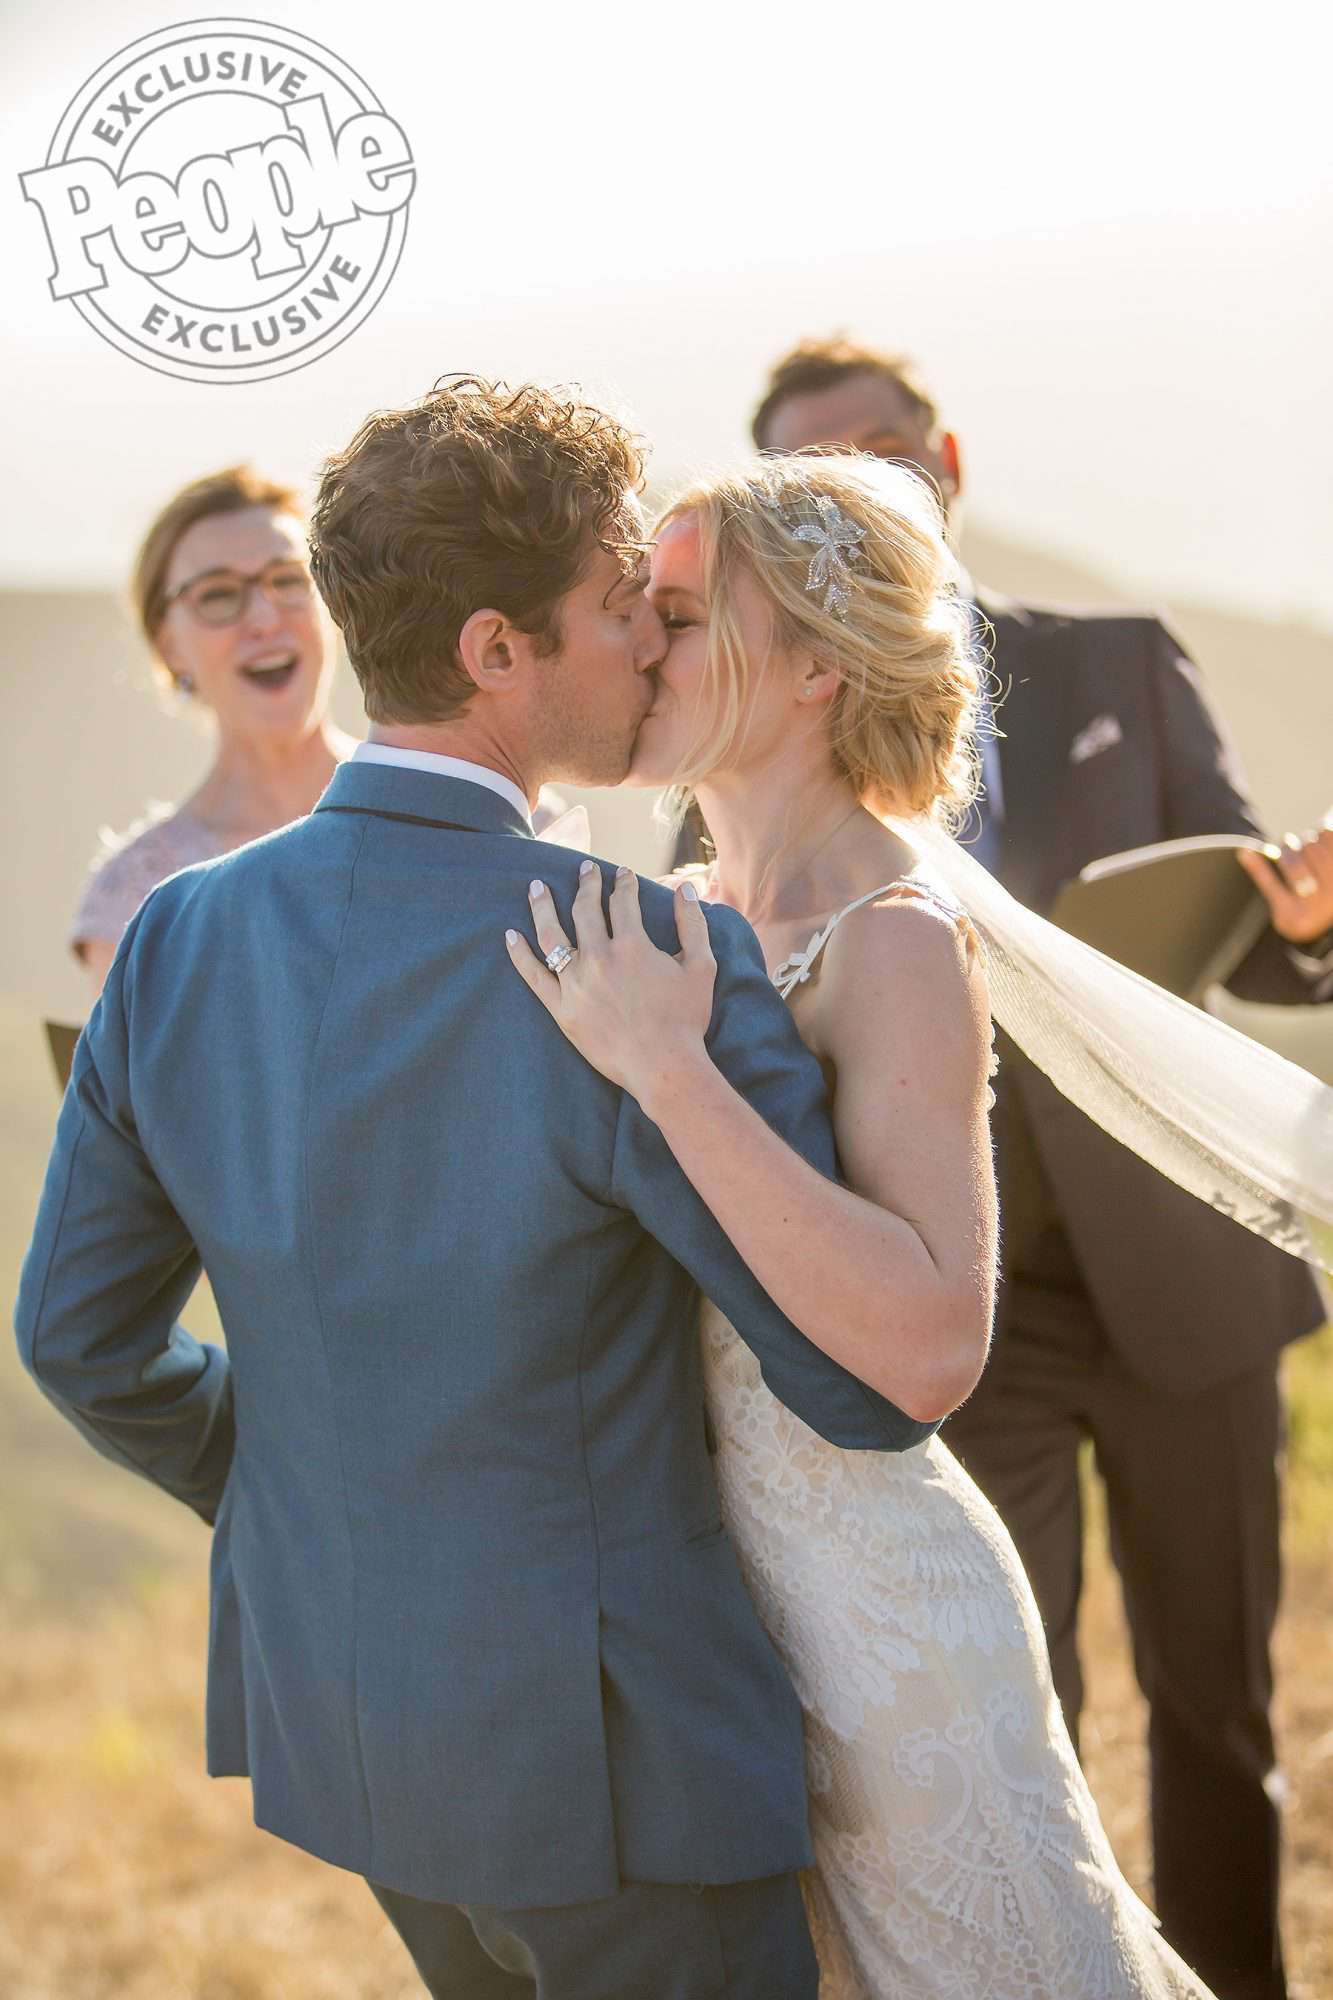 <p>The Walking Dead alum Bell (who played Amy Harrison) married her actor fianc&eacute; Robertson on Oct. 6 on a mountaintop overlooking Pfeiffer Beach in Big Sur, California.</p>
                            <p>"He took me to a friend's birthday on an estate overlooking Pfeiffer beach when we were very new and I fell in love. Four years later we were able to vow our forevers to each other in front of our closest friends and family at the very same spot with the sun setting over the rolling waves of the Pacific," she told PEOPLE.</p>
                            